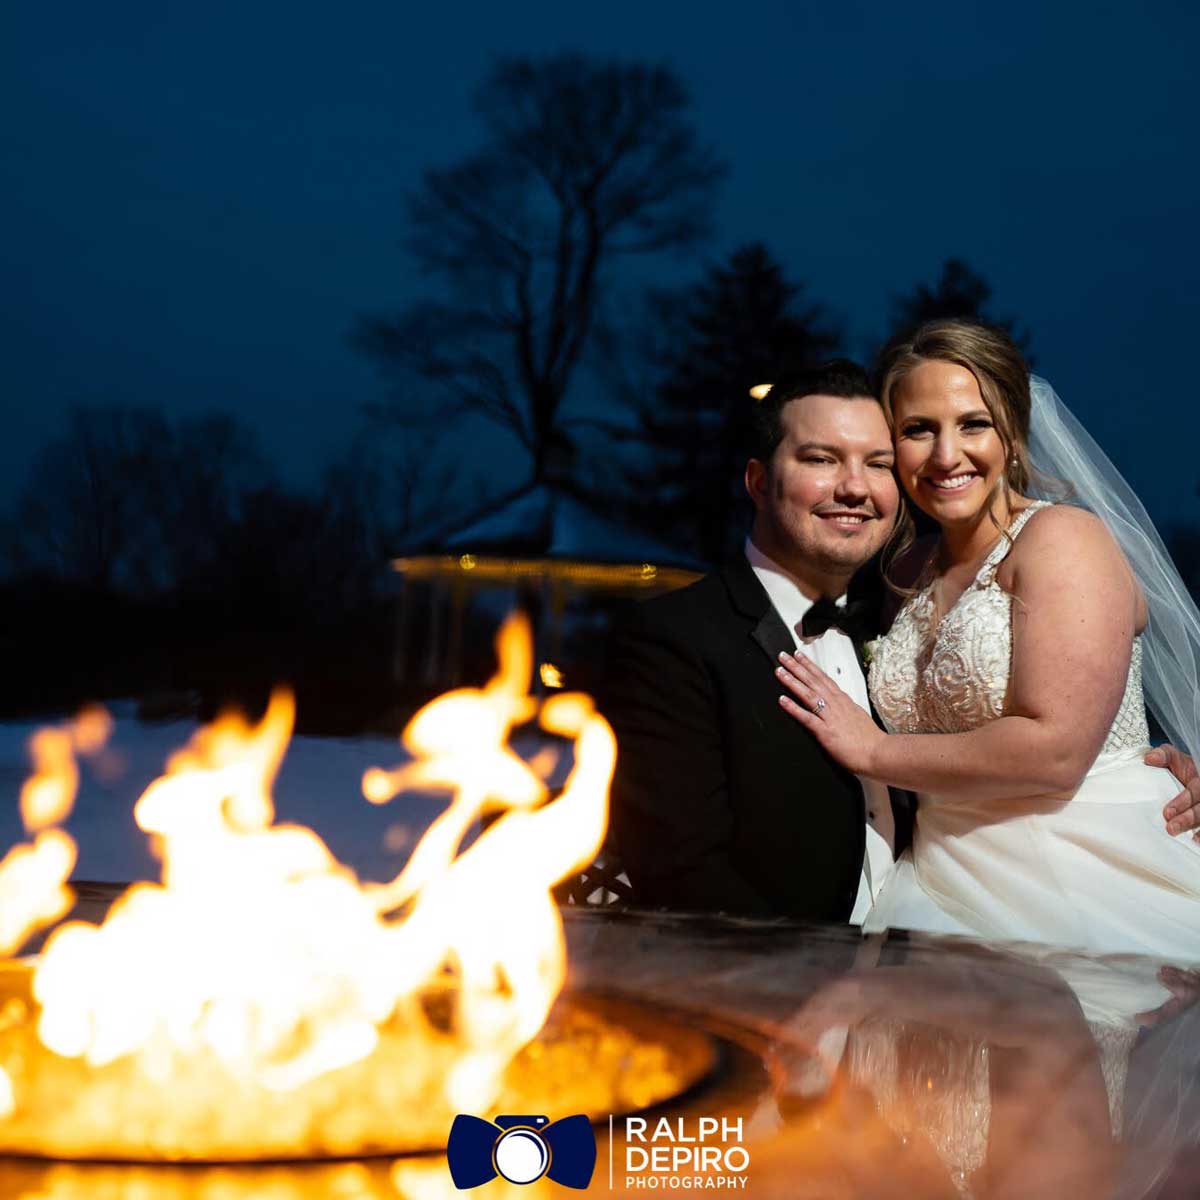 A bride and groom pose in front of a fire pit at one of the outdoor wedding venues in NJ.